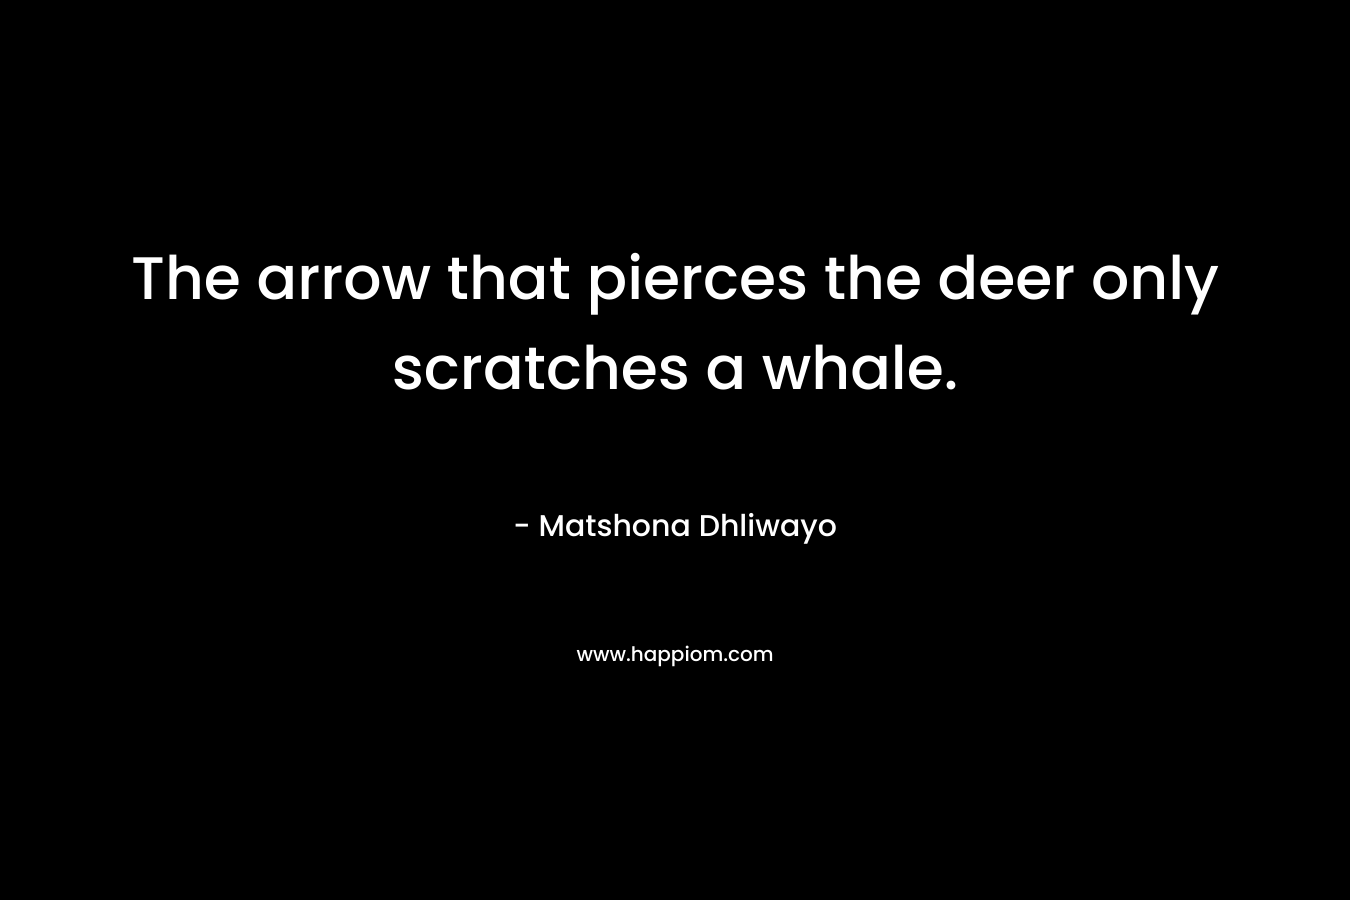 The arrow that pierces the deer only scratches a whale.